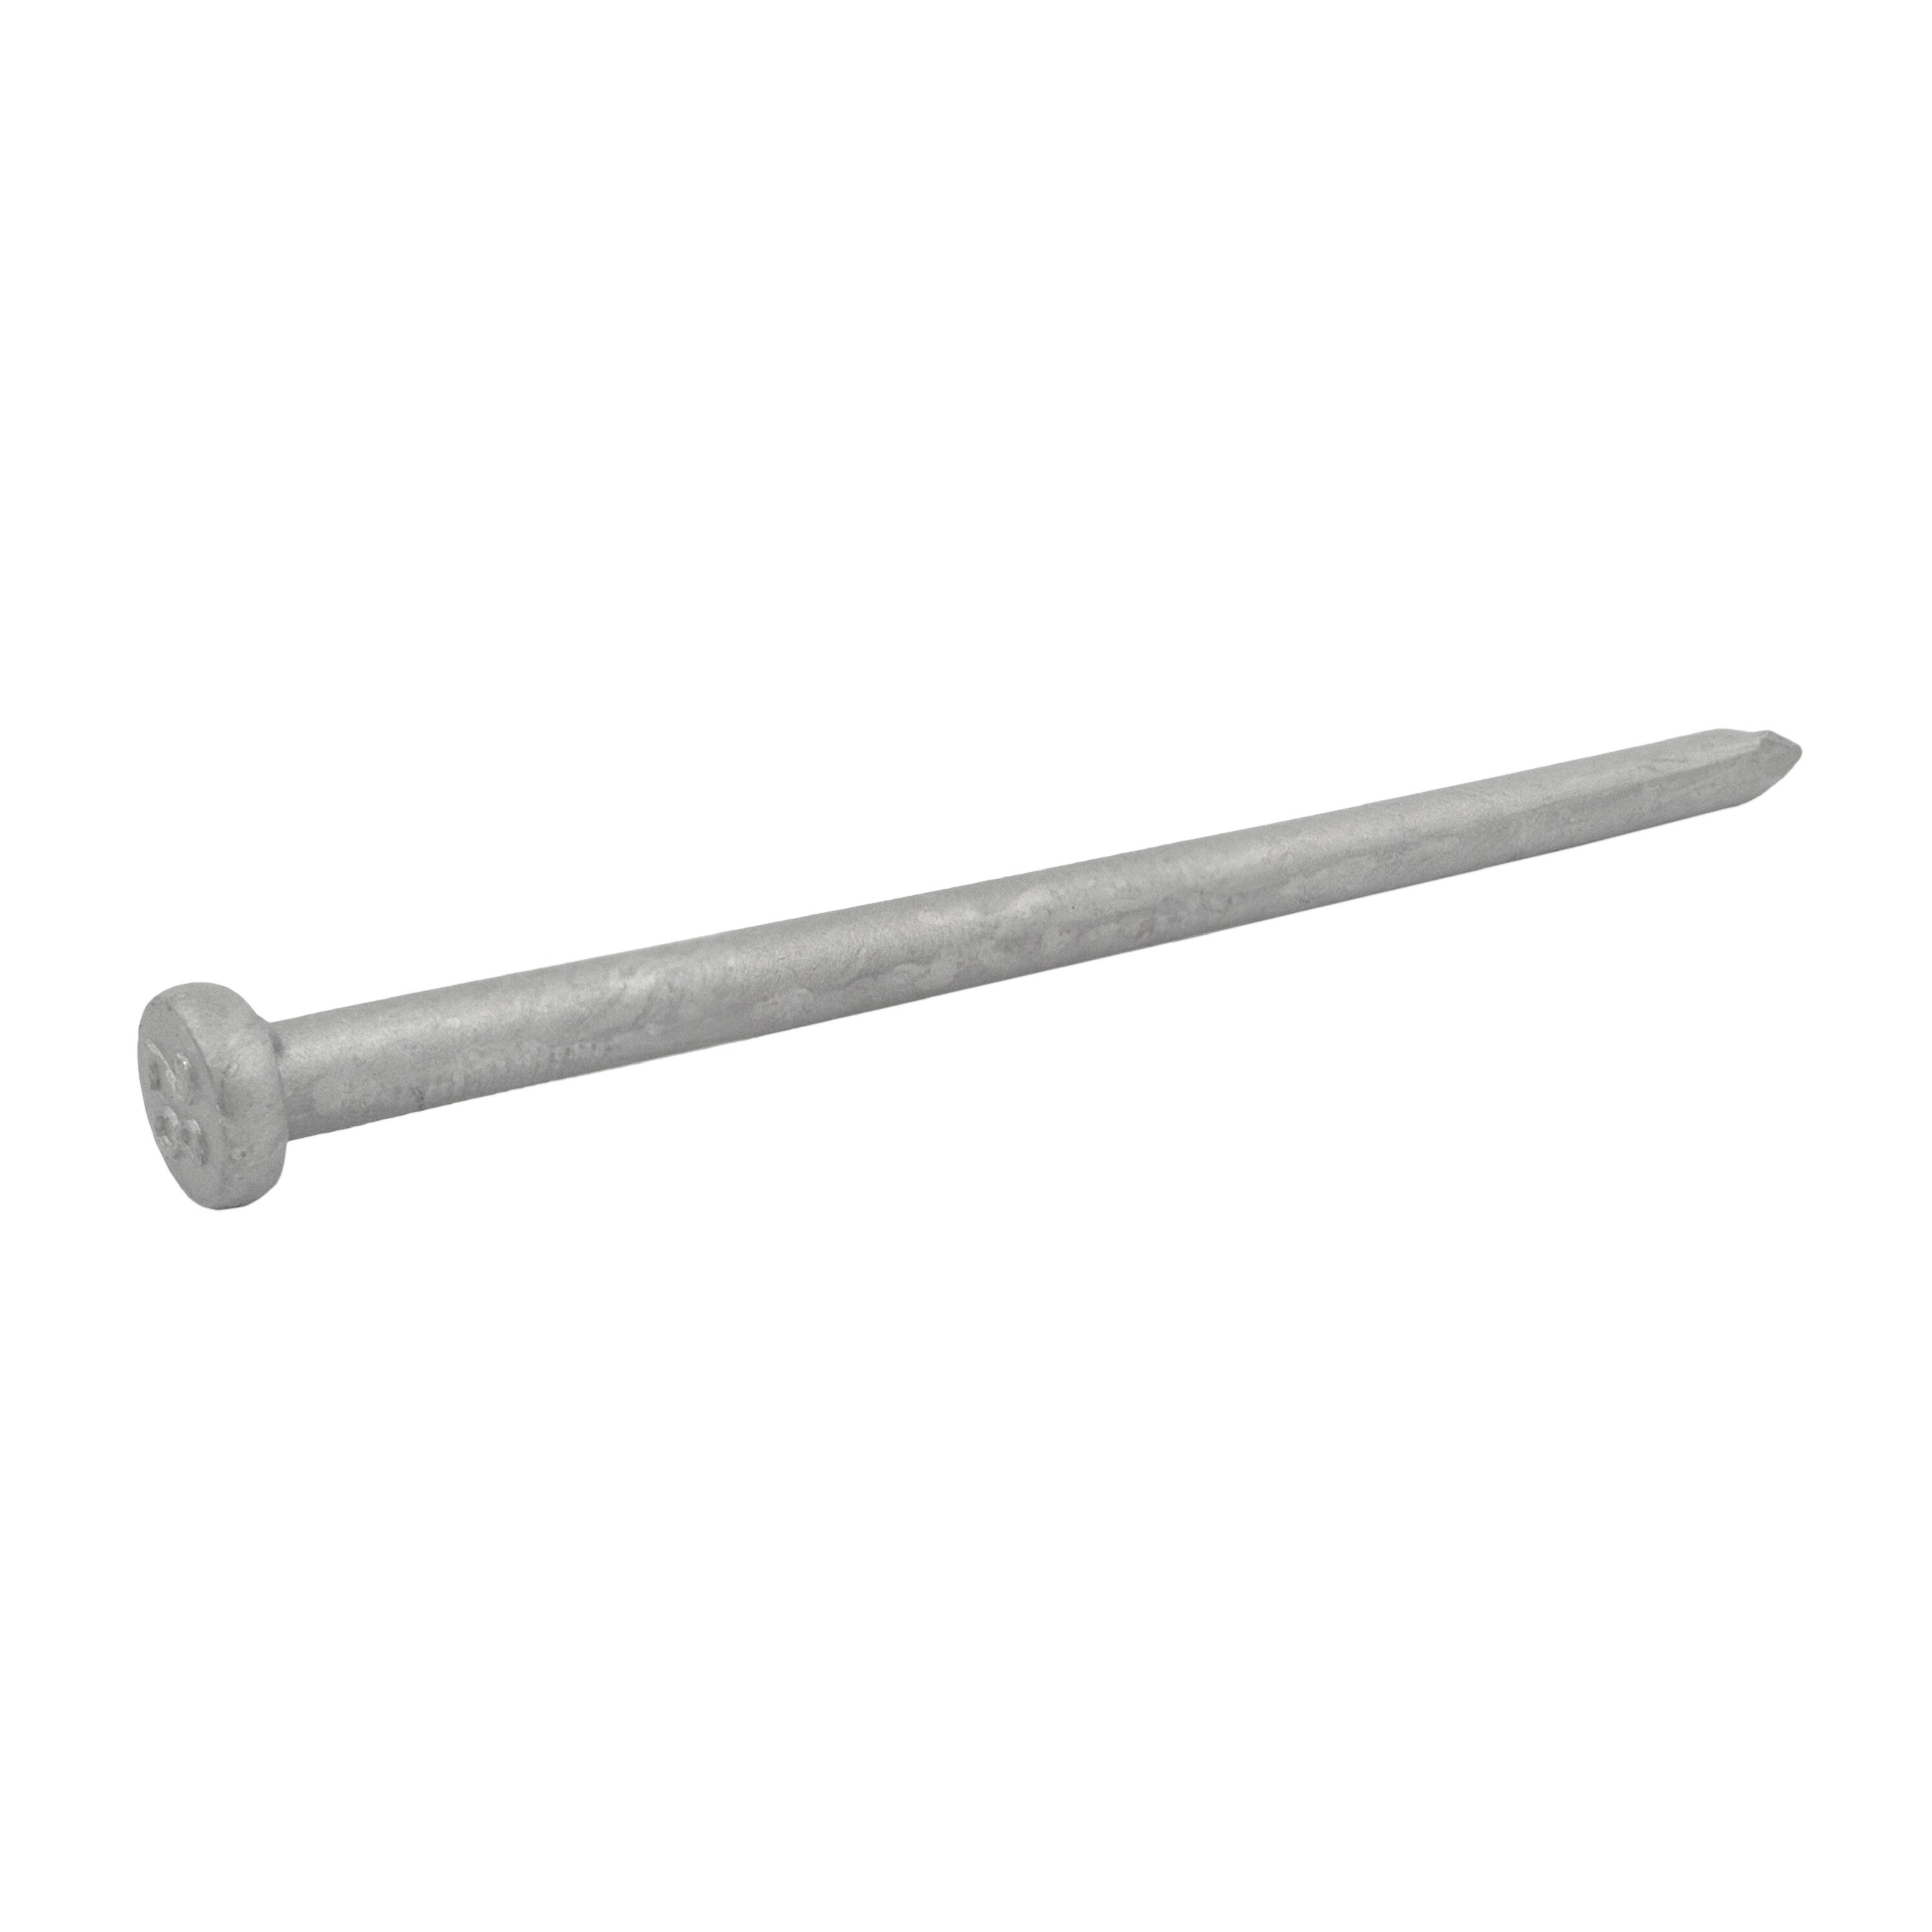 2 Inch 1.5 by 8 Iron Nail, 6 Gauge at Rs 82/kg in Kanpur | ID: 2851704826588